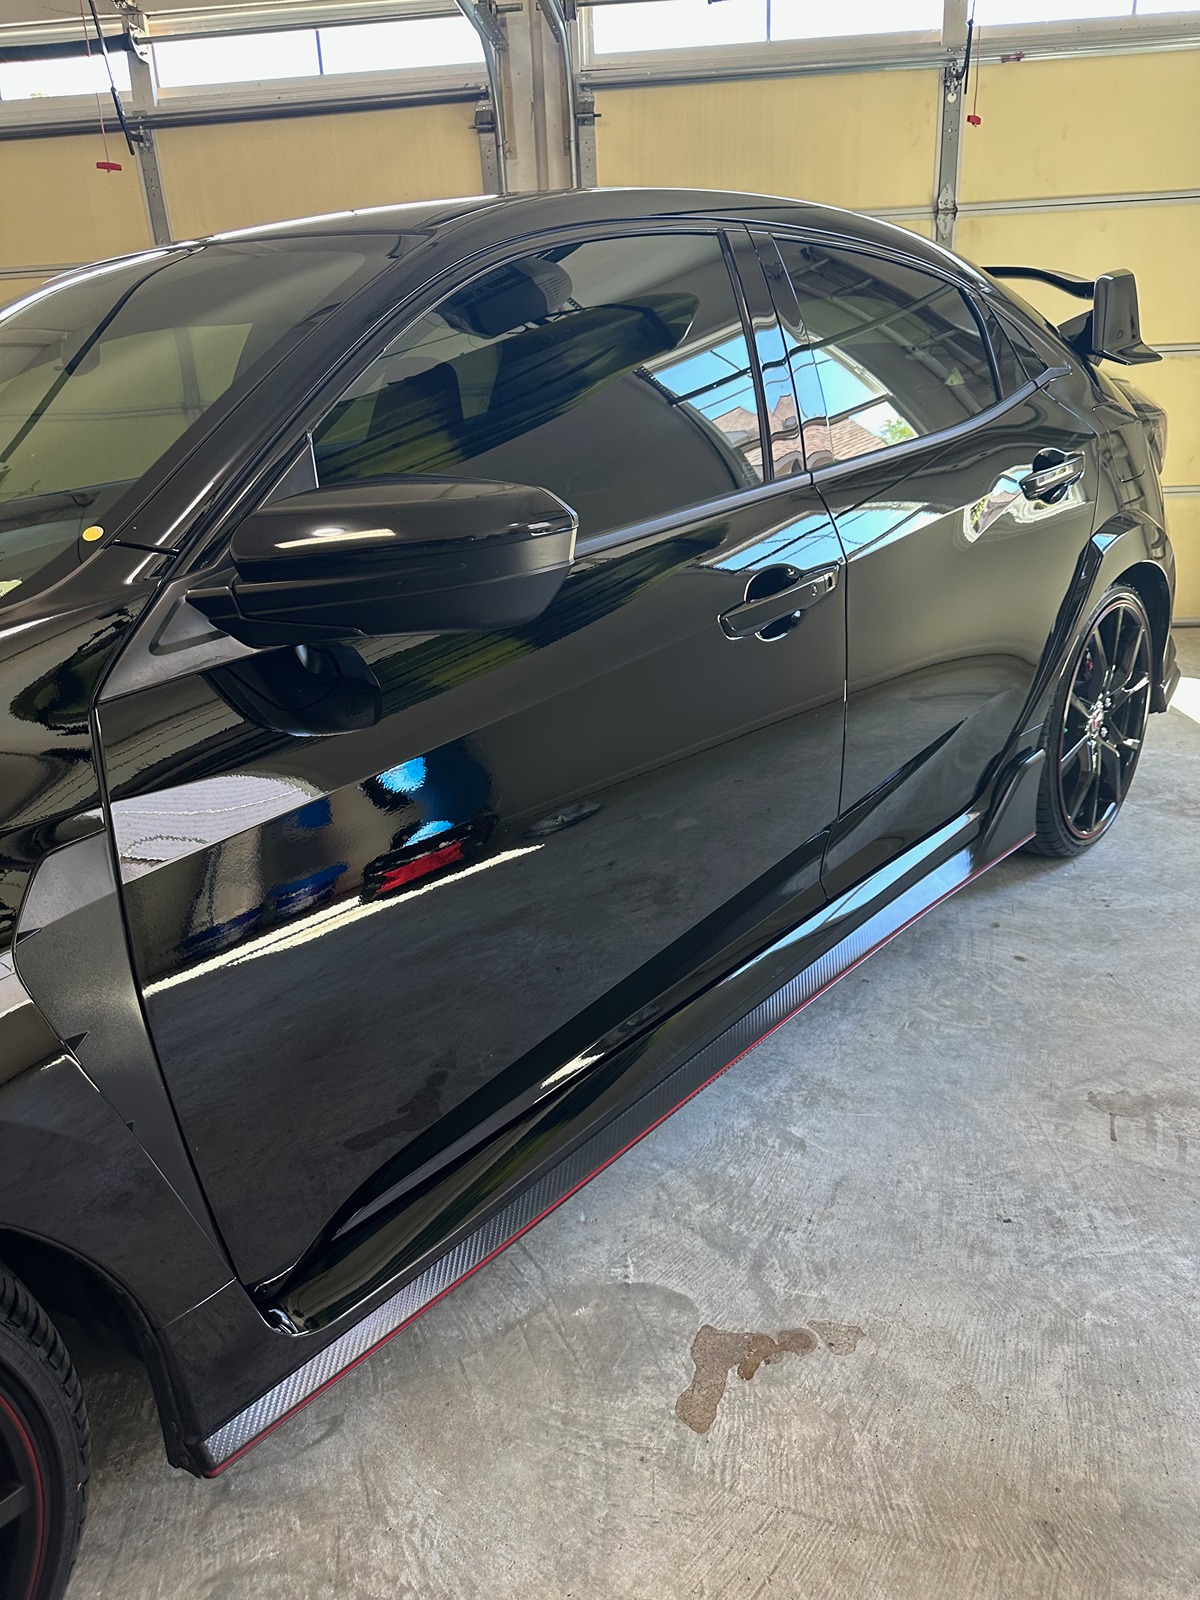 Honda Civic 10th gen Sold. 2019 Civic Type R for sale IMG_8224